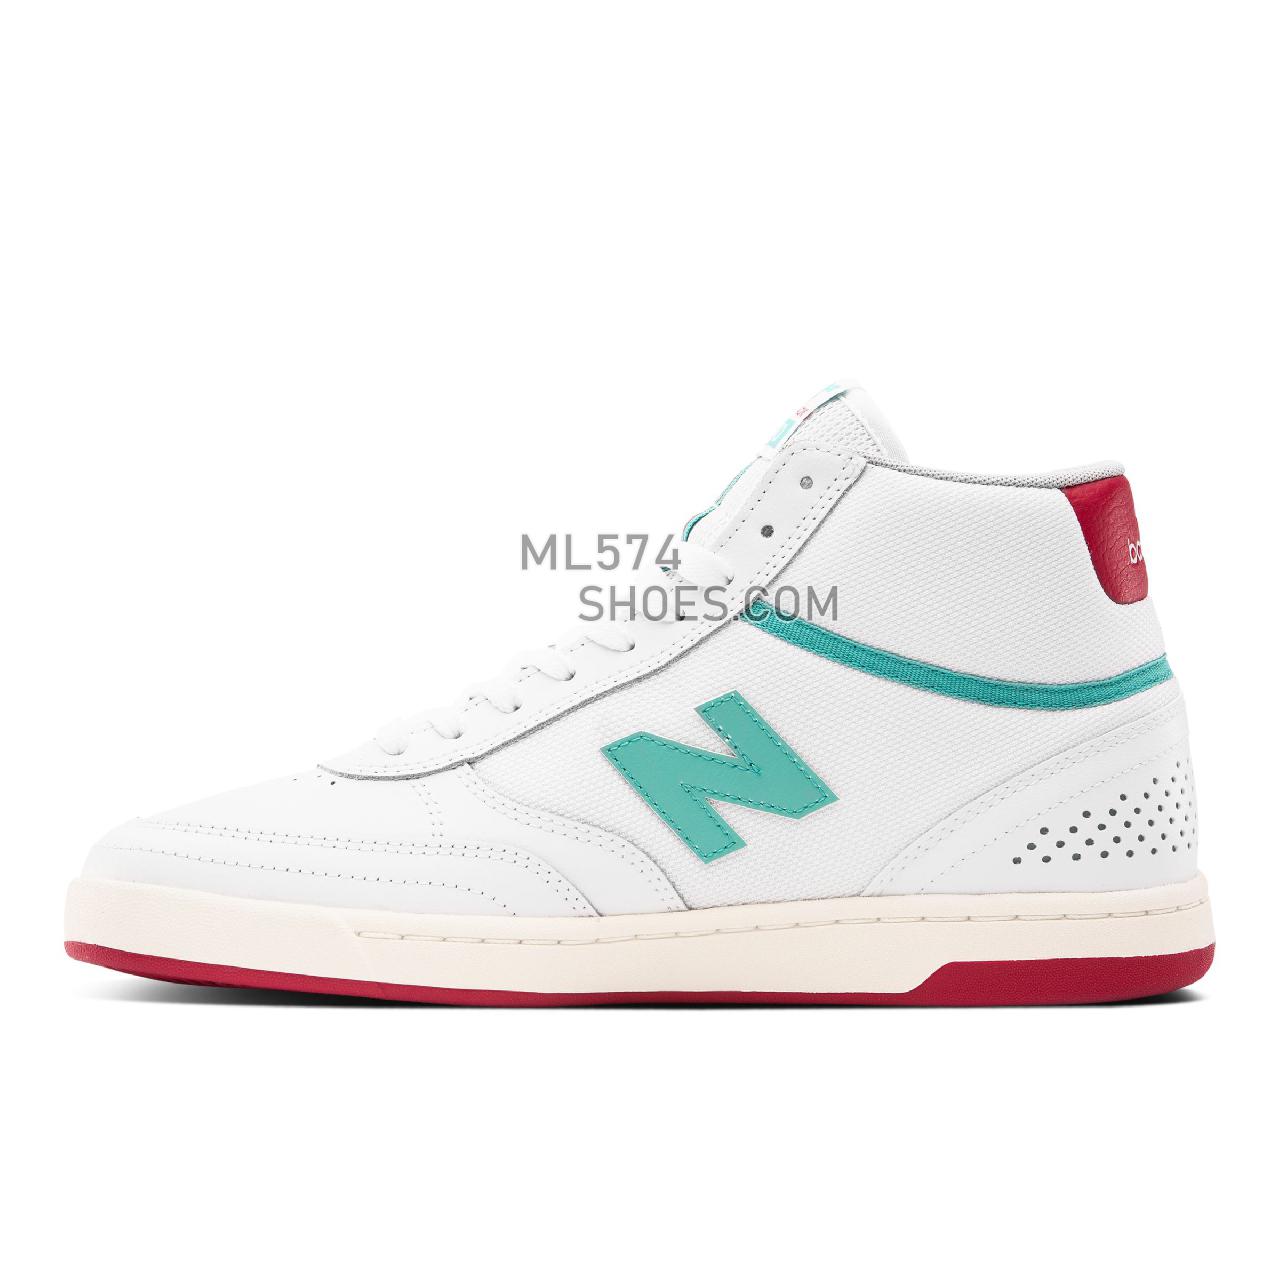 New Balance NB NUMERIC TOM KNOX440 HIGH - Unisex Men's Women's NB Numeric Skate - White with Red - NM440HRK